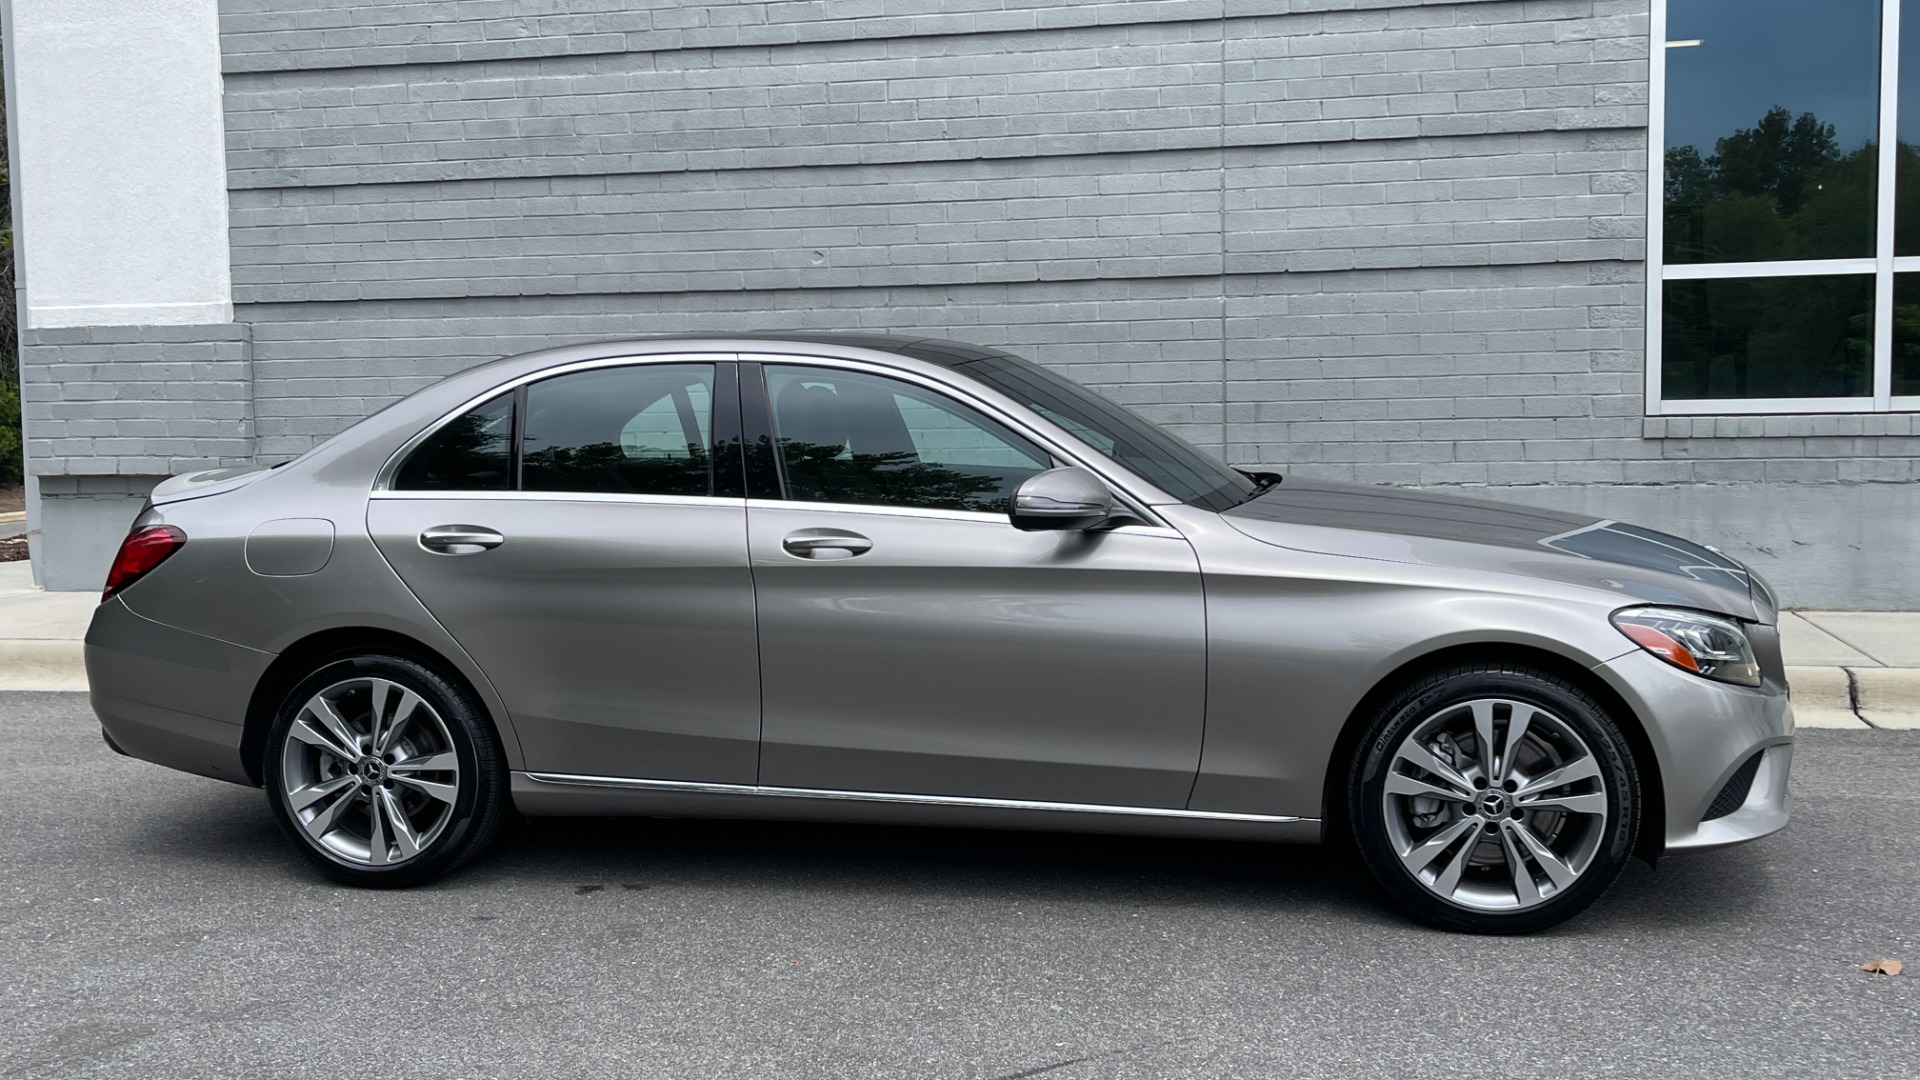 Used 2019 Mercedes-Benz C-Class C 300 / BURMESTER SOUND / PANORAMIC ROOF / WIRELESS CHARING for sale $33,995 at Formula Imports in Charlotte NC 28227 2